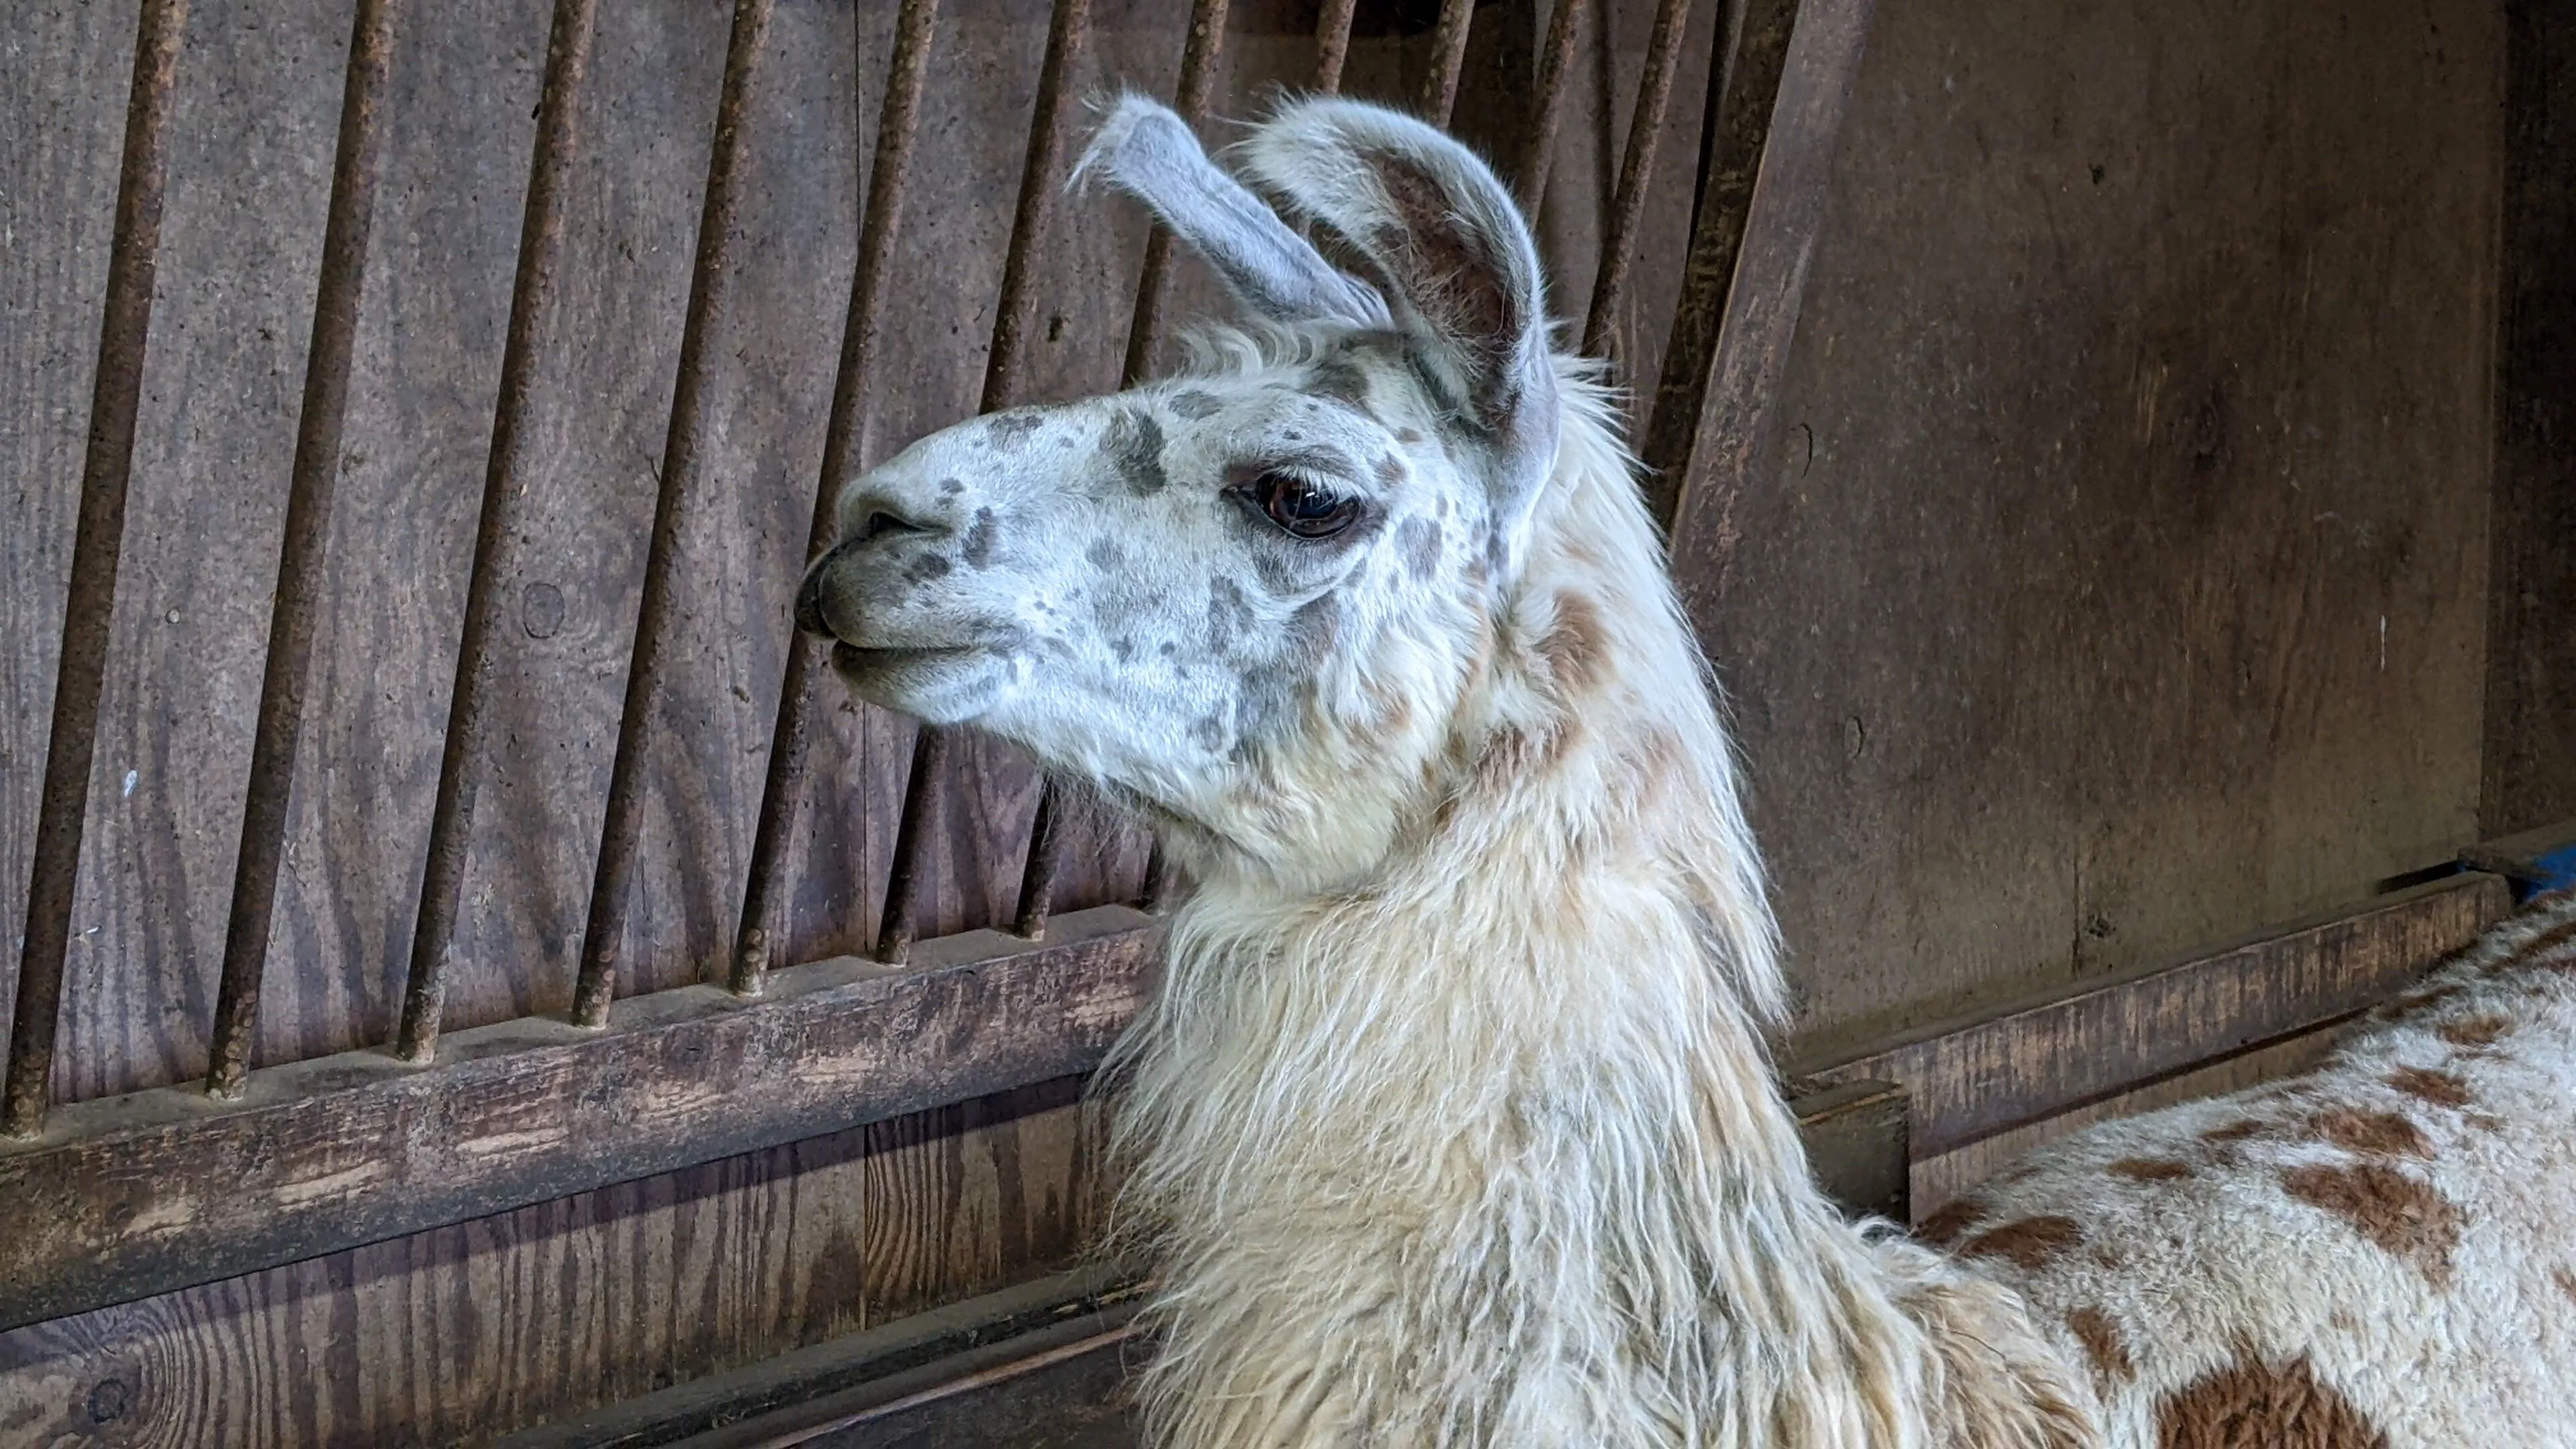 An image of a llama named Speckles lying down inside a barn